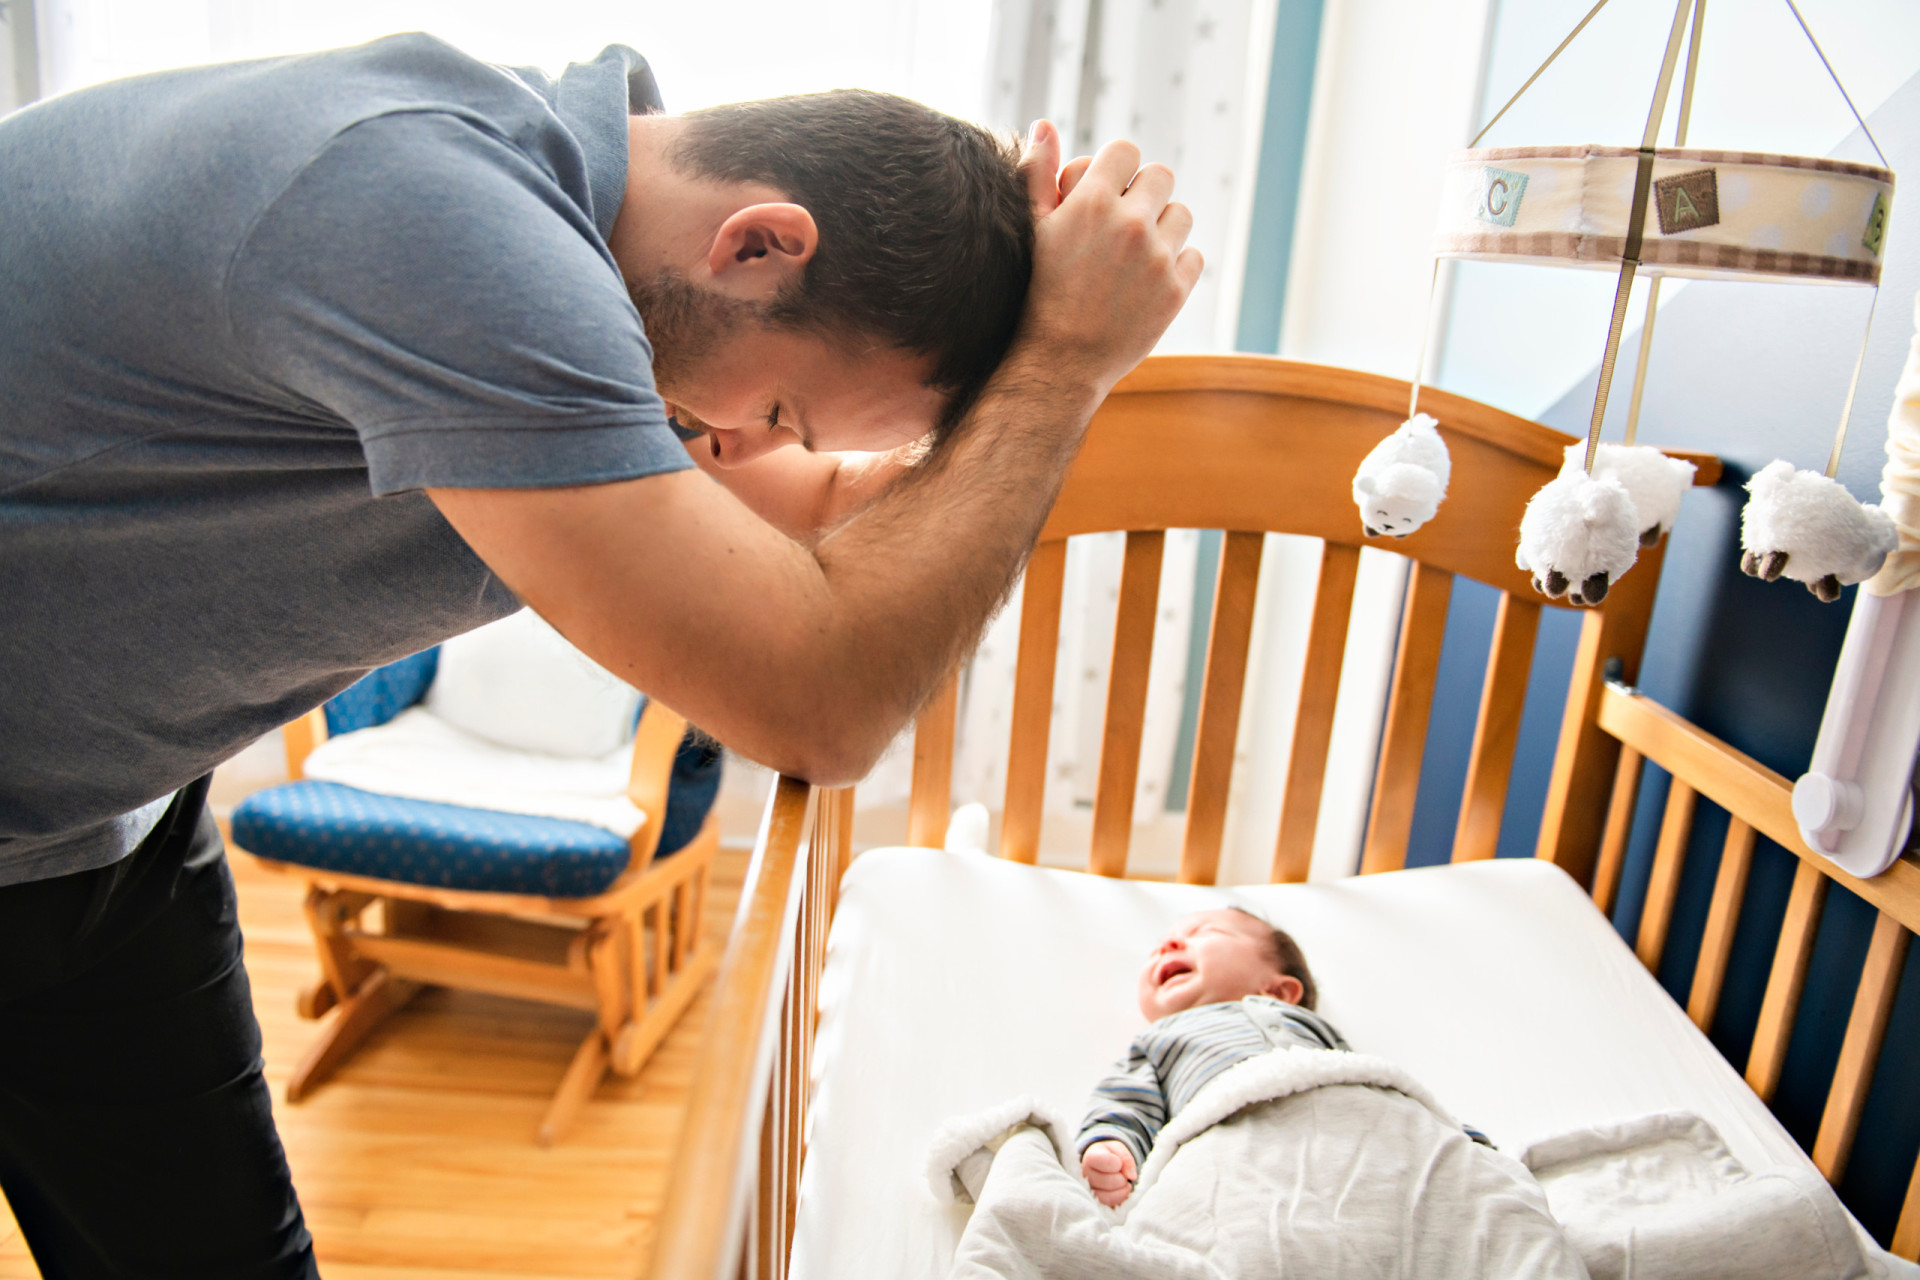 <p>But fathers aren't immune to feelings of guilt. It's a relatively recent phenomenon that has emerged as a new generation of dads has become more involved in day-to-day childcare.</p><p>You may also like:<a href="https://www.starsinsider.com/n/288152?utm_source=msn.com&utm_medium=display&utm_campaign=referral_description&utm_content=548172en-en"> 58 things you cannot do while pregnant</a></p>